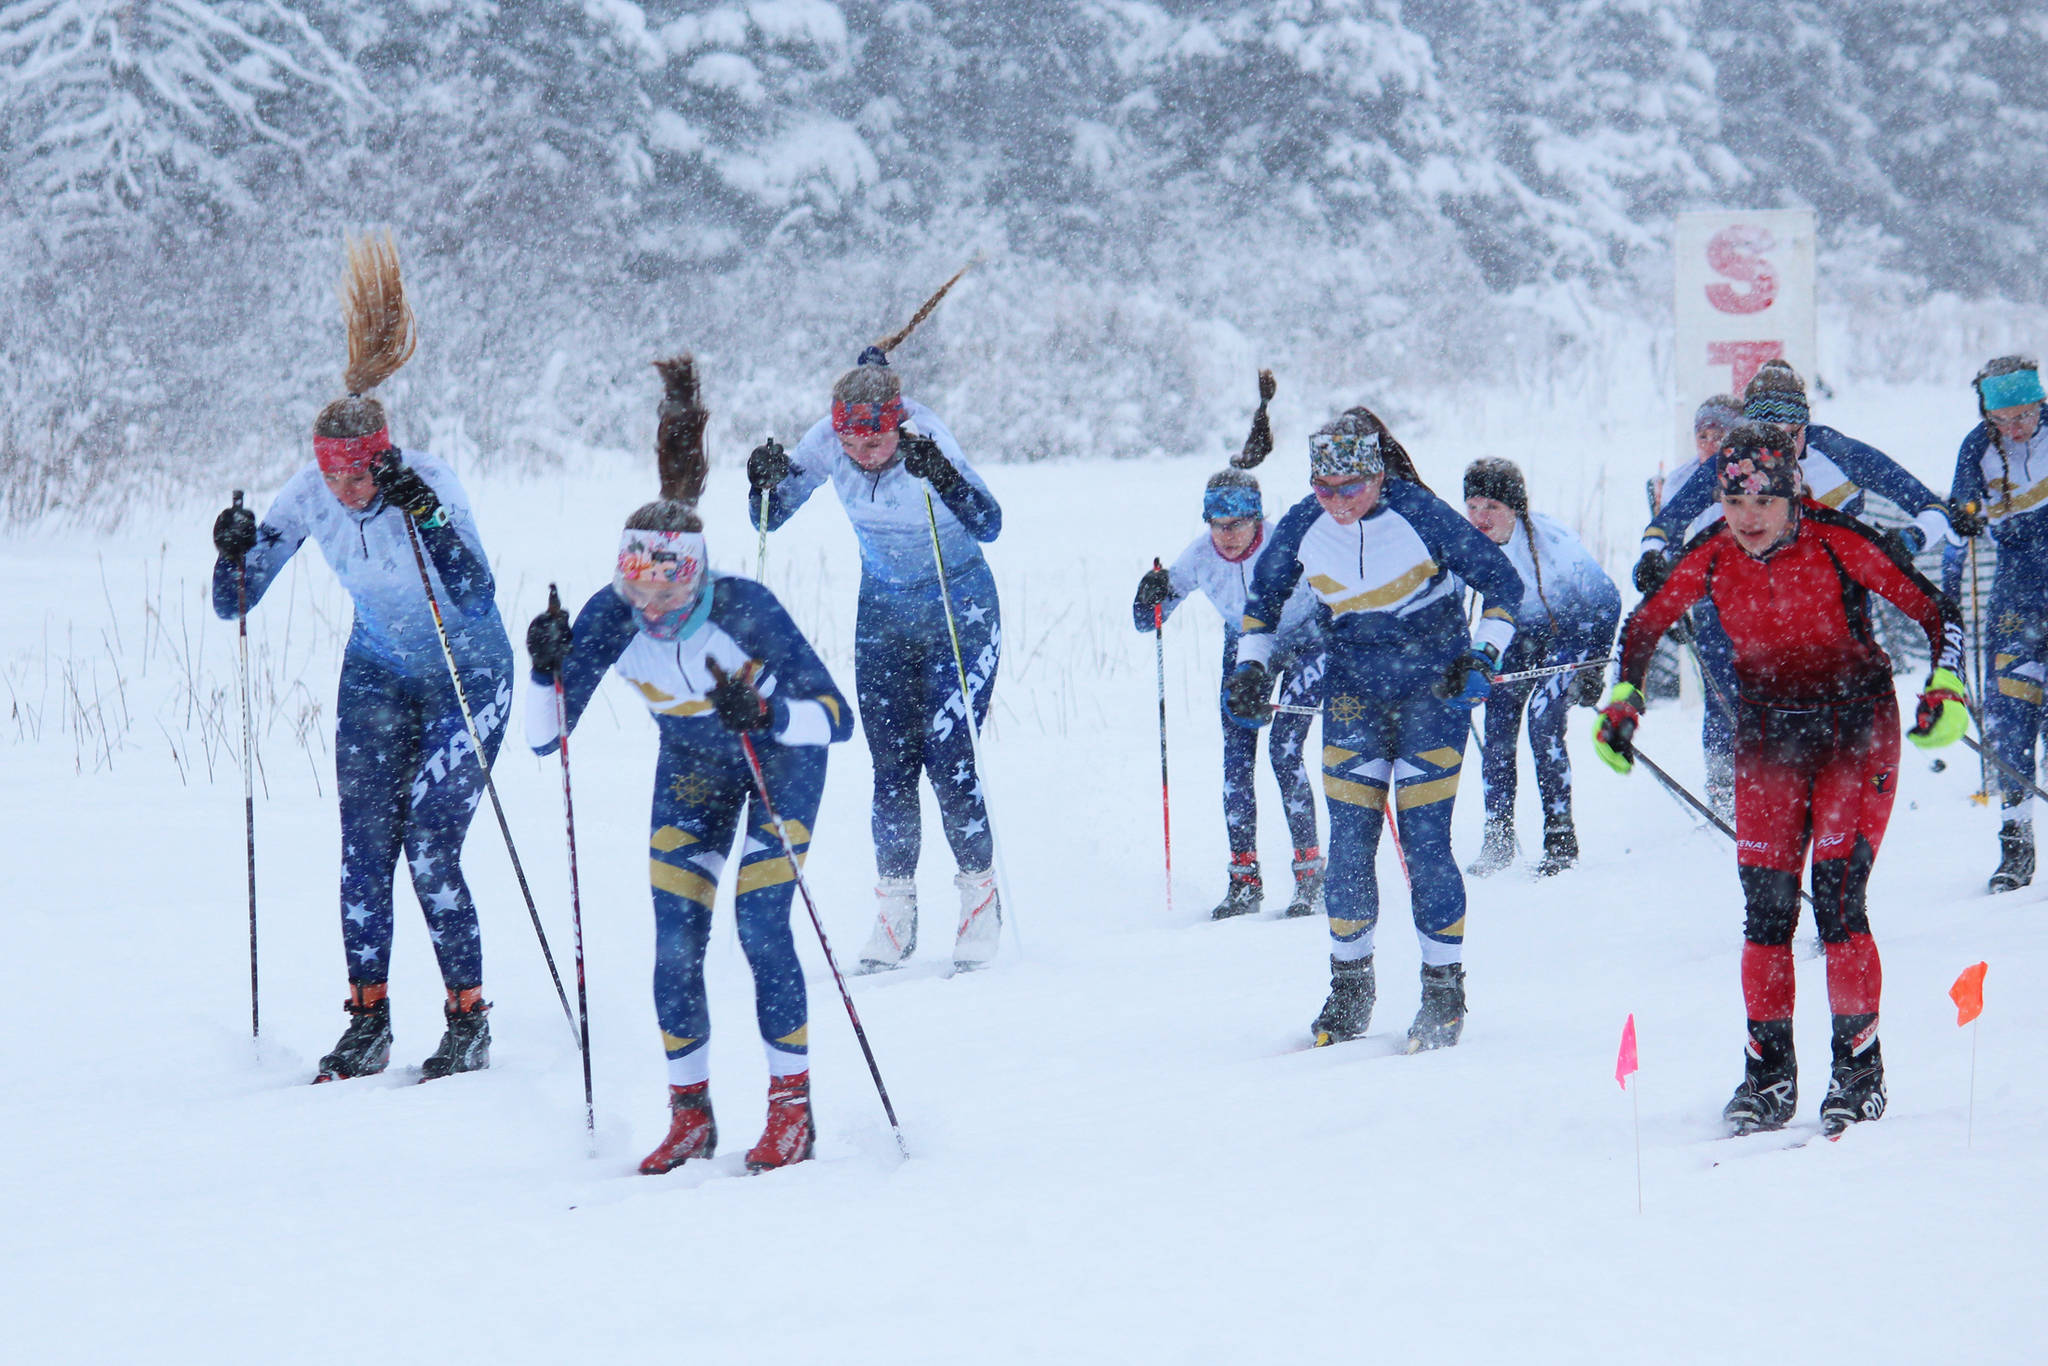 Skiers take off from the starting line of the girls’ race Friday, Dec. 14, 2018 during a Homer-hosted ski meet at the Ohlson Mountain Trails near Homer, Alaska. Varsity and JV skiers raced at the same time, with the JV members taking a shorter route. (Photo by Megan Pacer/Homer News)